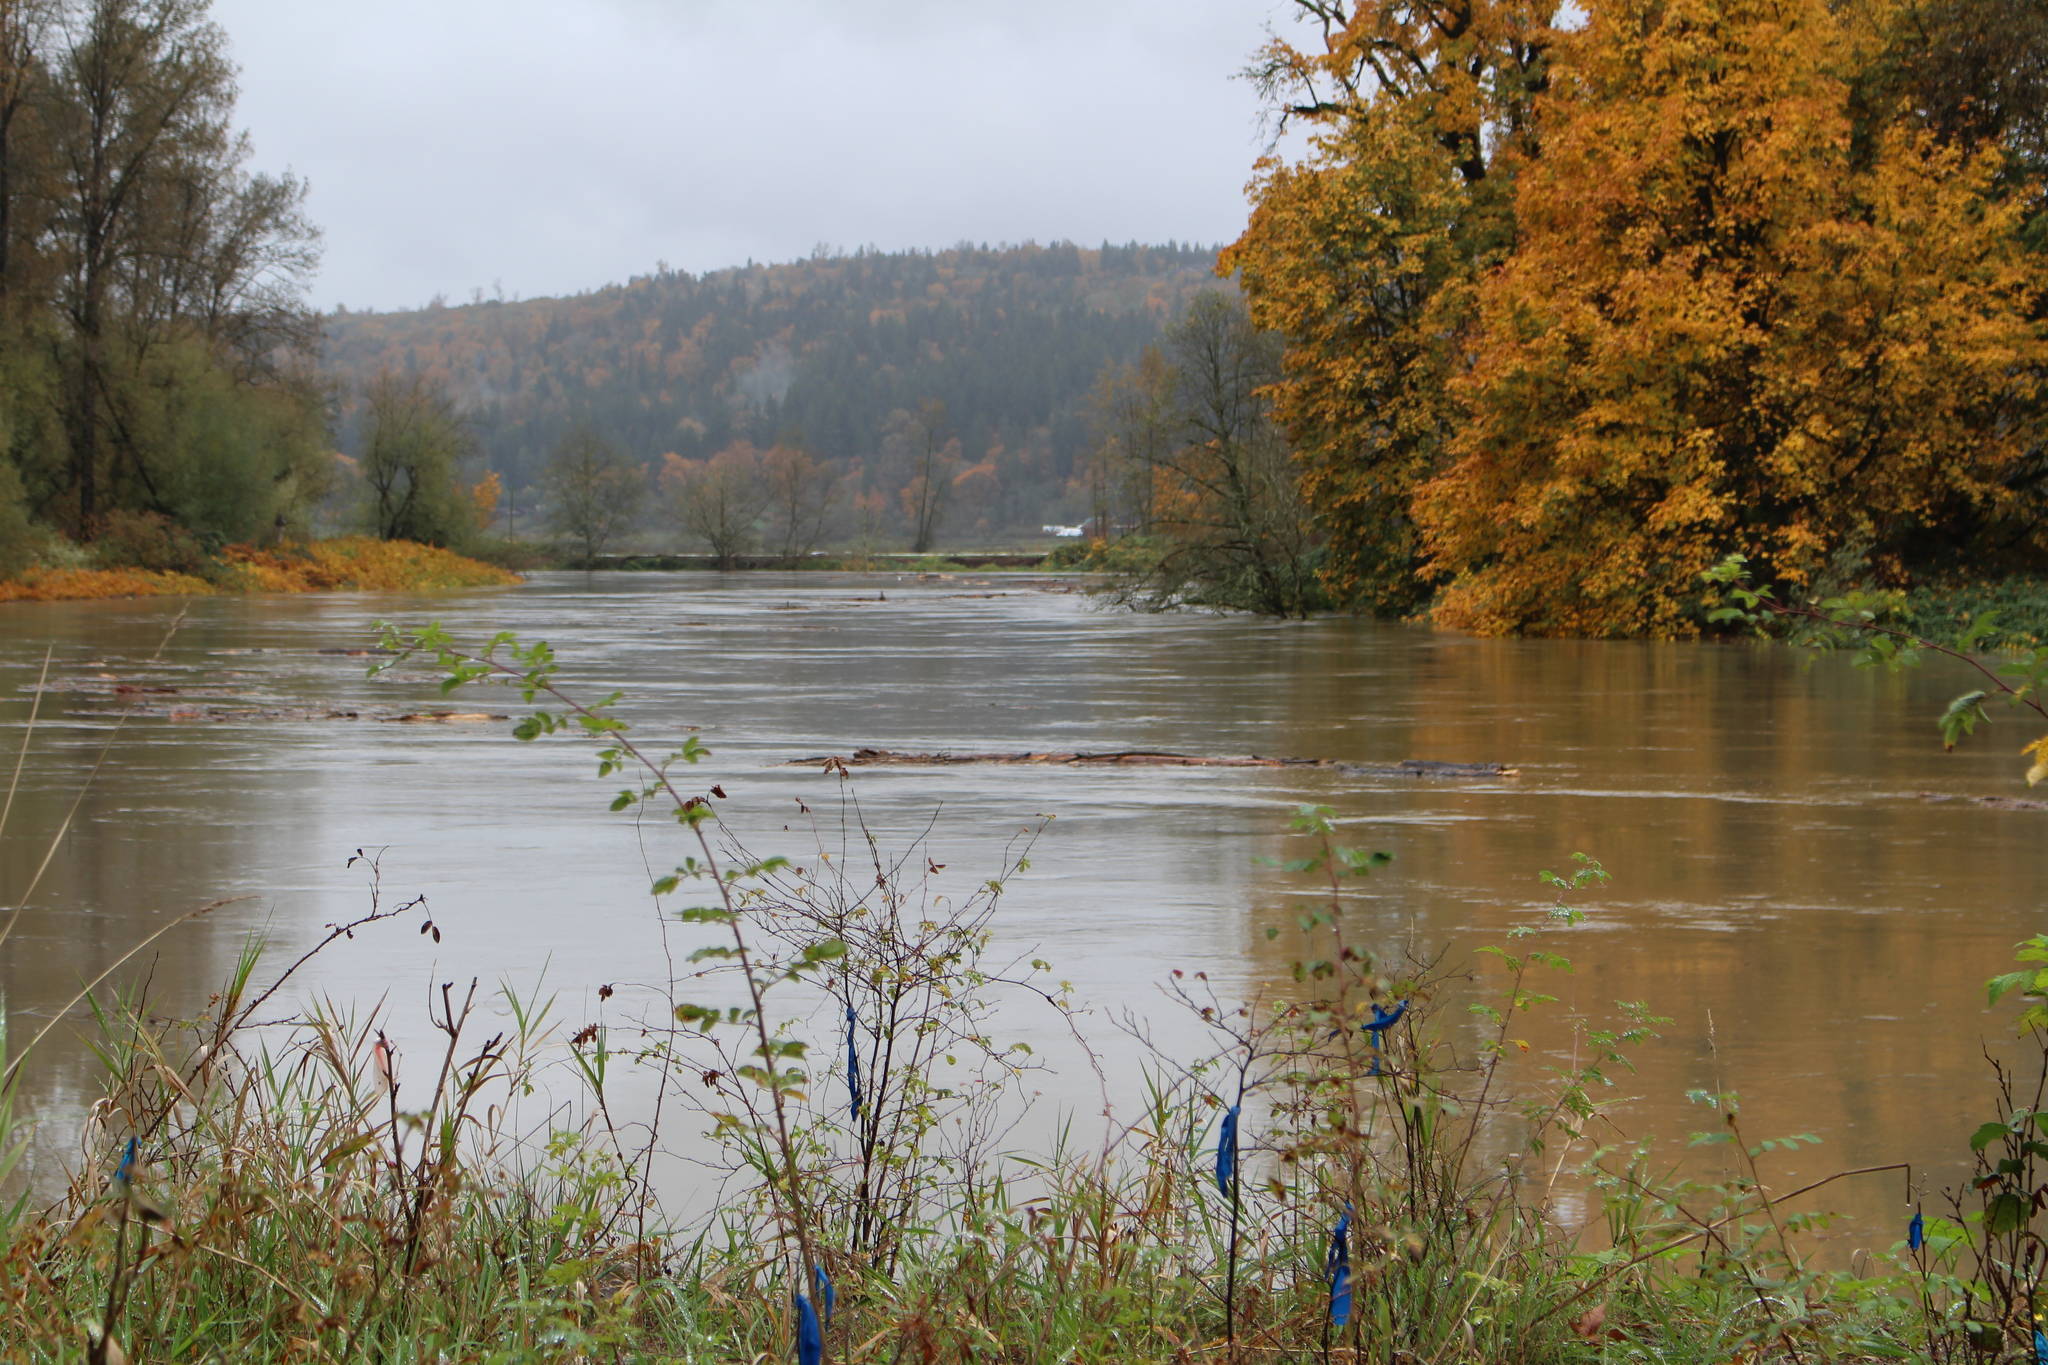 The Snoqualmie River near Carnation on Oct. 22, 2019. Aaron Kunkler/staff photo